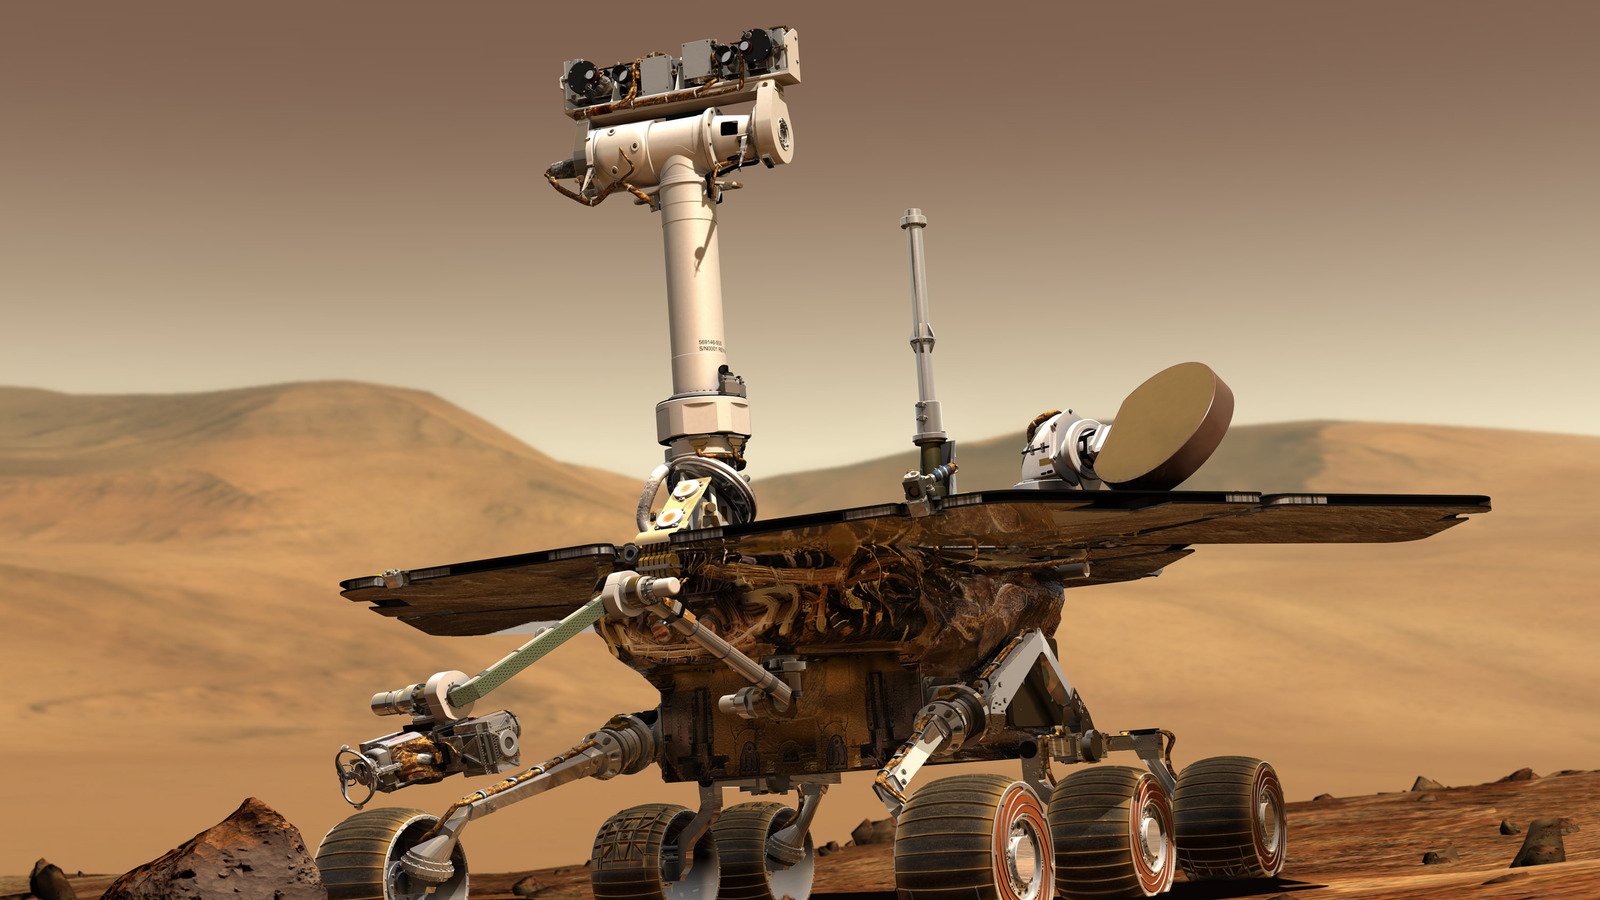 What Will Happen To The Mars Rover Opportunity's Remains?